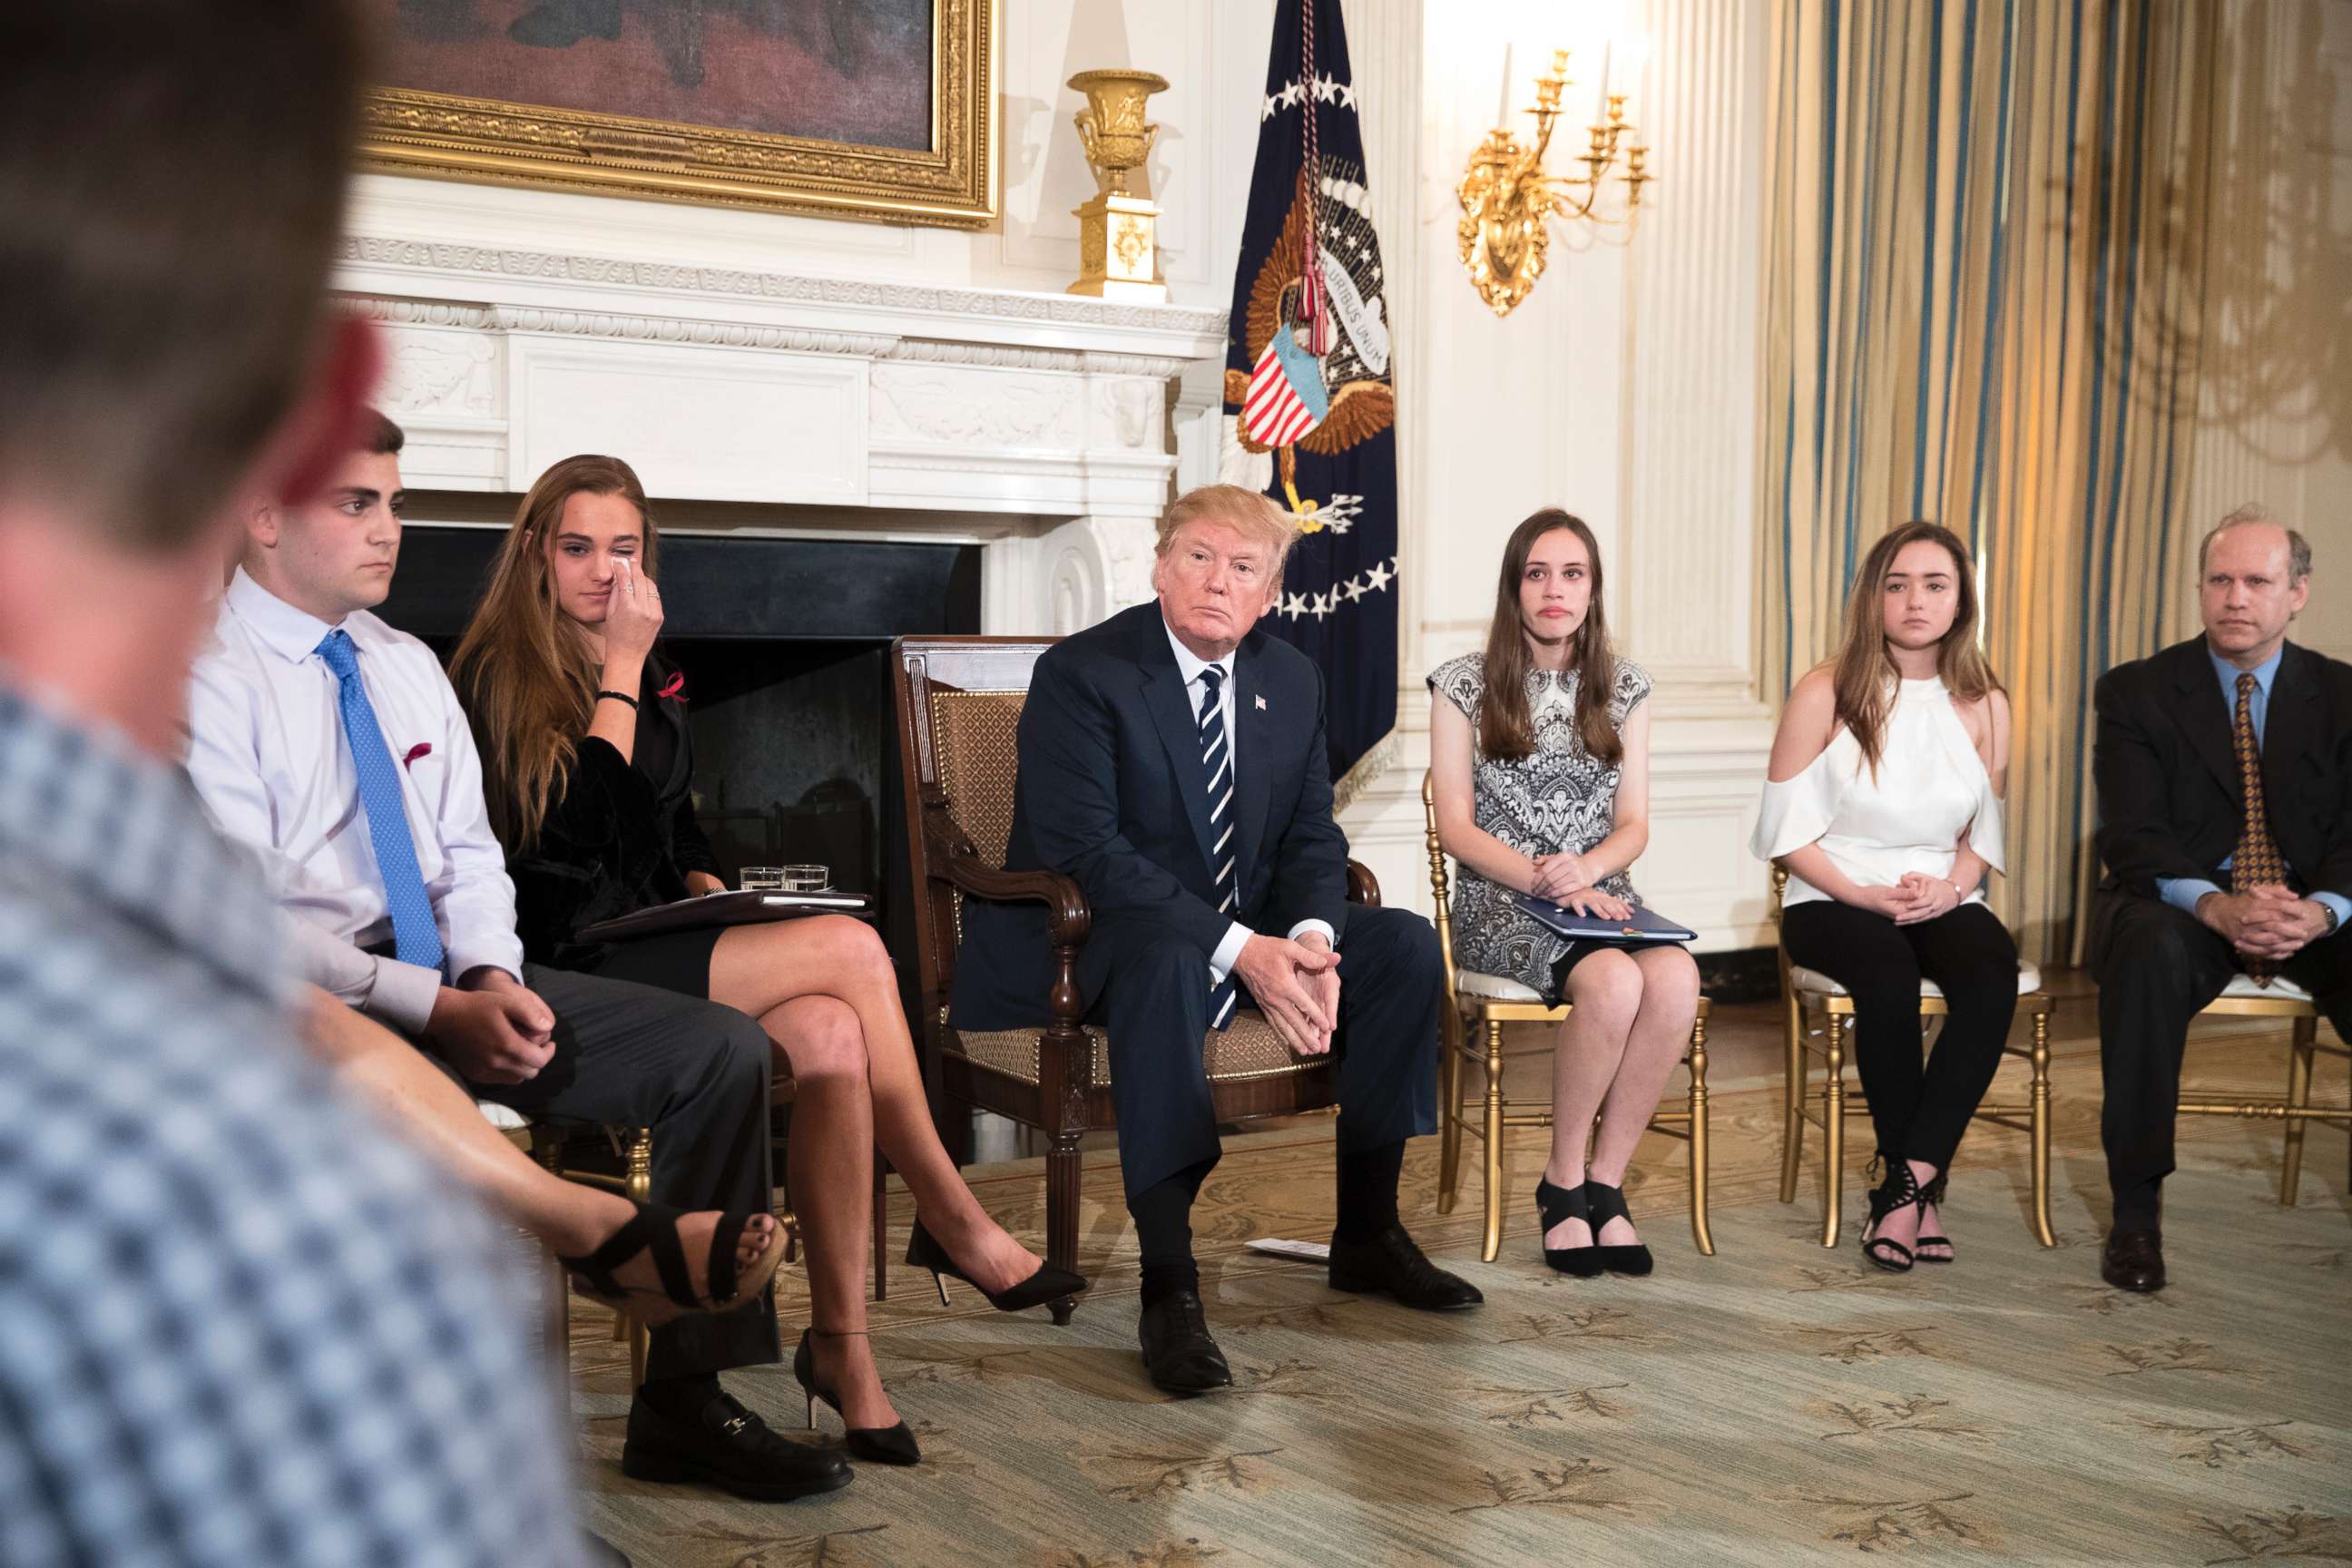 PHOTO: Marjory Stoneman Douglas High School shooting survivor Samuel Zeif, left, speaks to President Trump during a listening session with high school students and teachers, at the White House on Feb. 21, 2018.